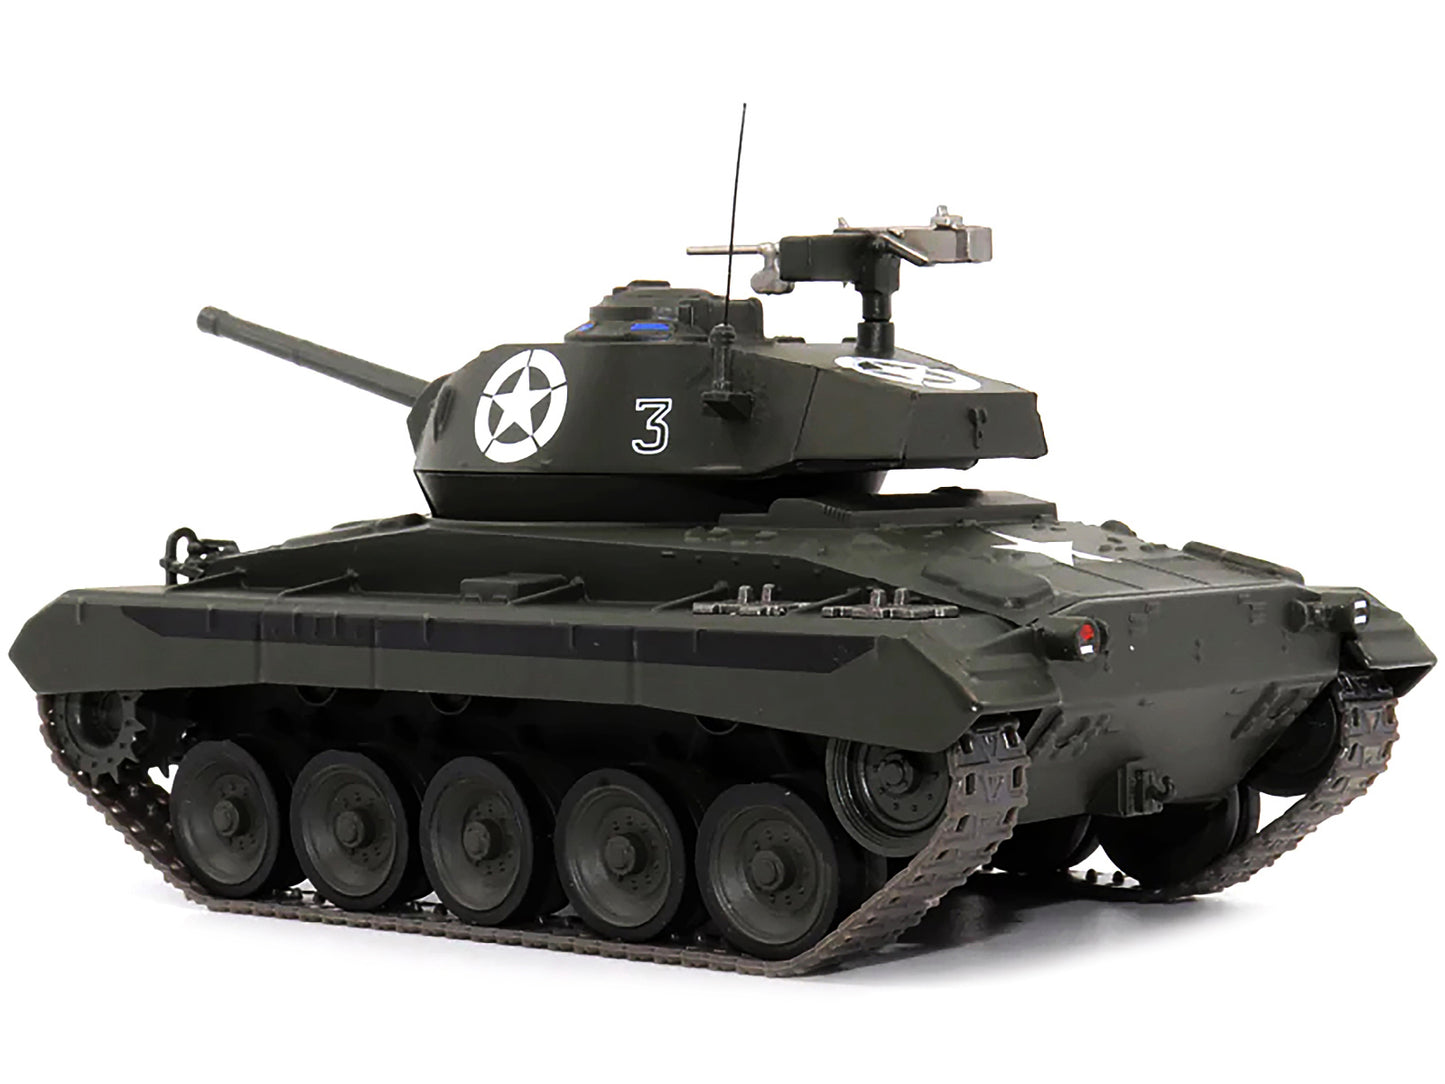 m24 chaffee tank 3 usa 1st armored division italy april 1945 1/43 diecast model